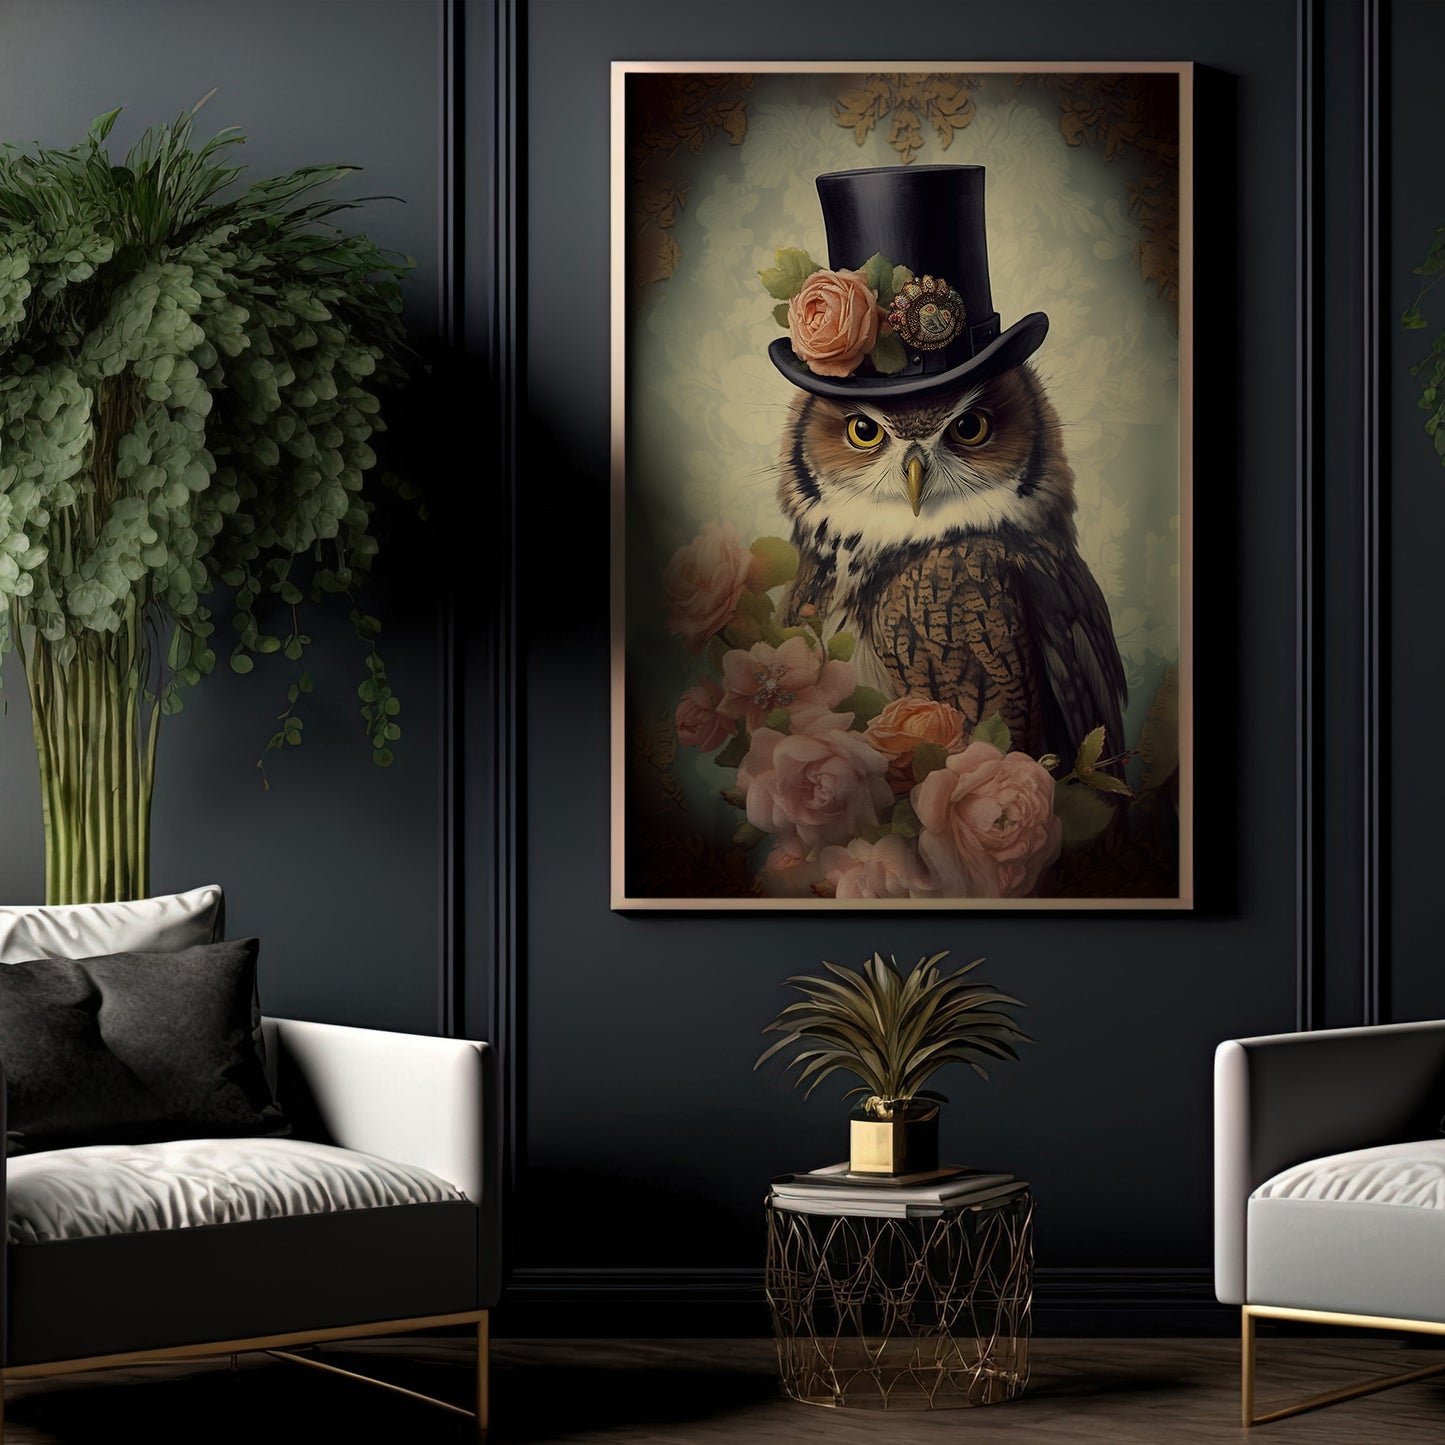 The Gothic Owl Flowers, Victorian Canvas Wall Art - Elegance Animals Poster Gift For Owl Lovers